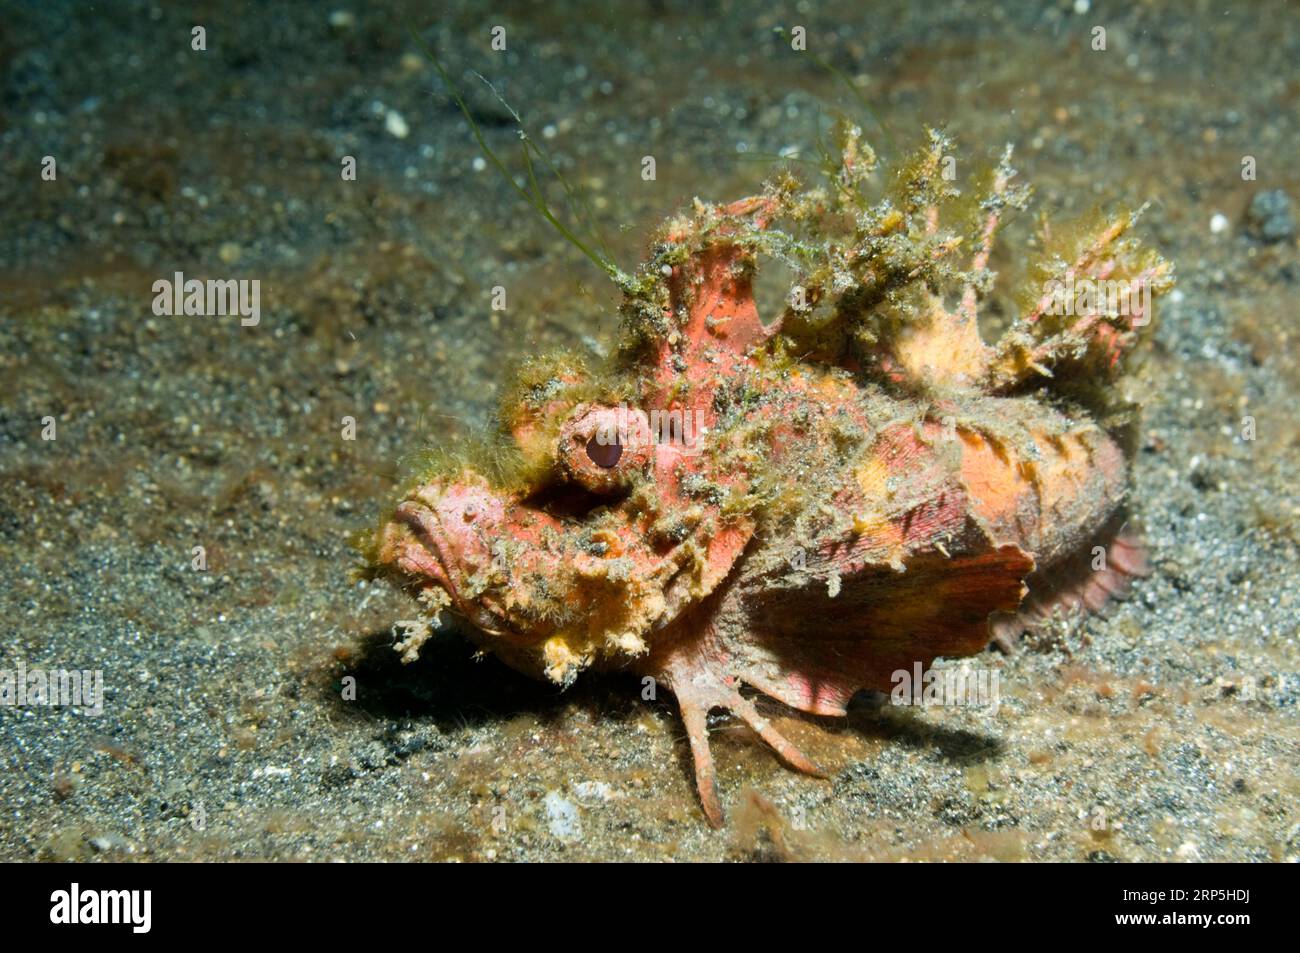 Spiny Devilfish - Inimicus didactylus.  It has long and sharp venomous dorsal fin spines that can inflict very painful stabs.  Lembeh, North Sulawesi, Stock Photo